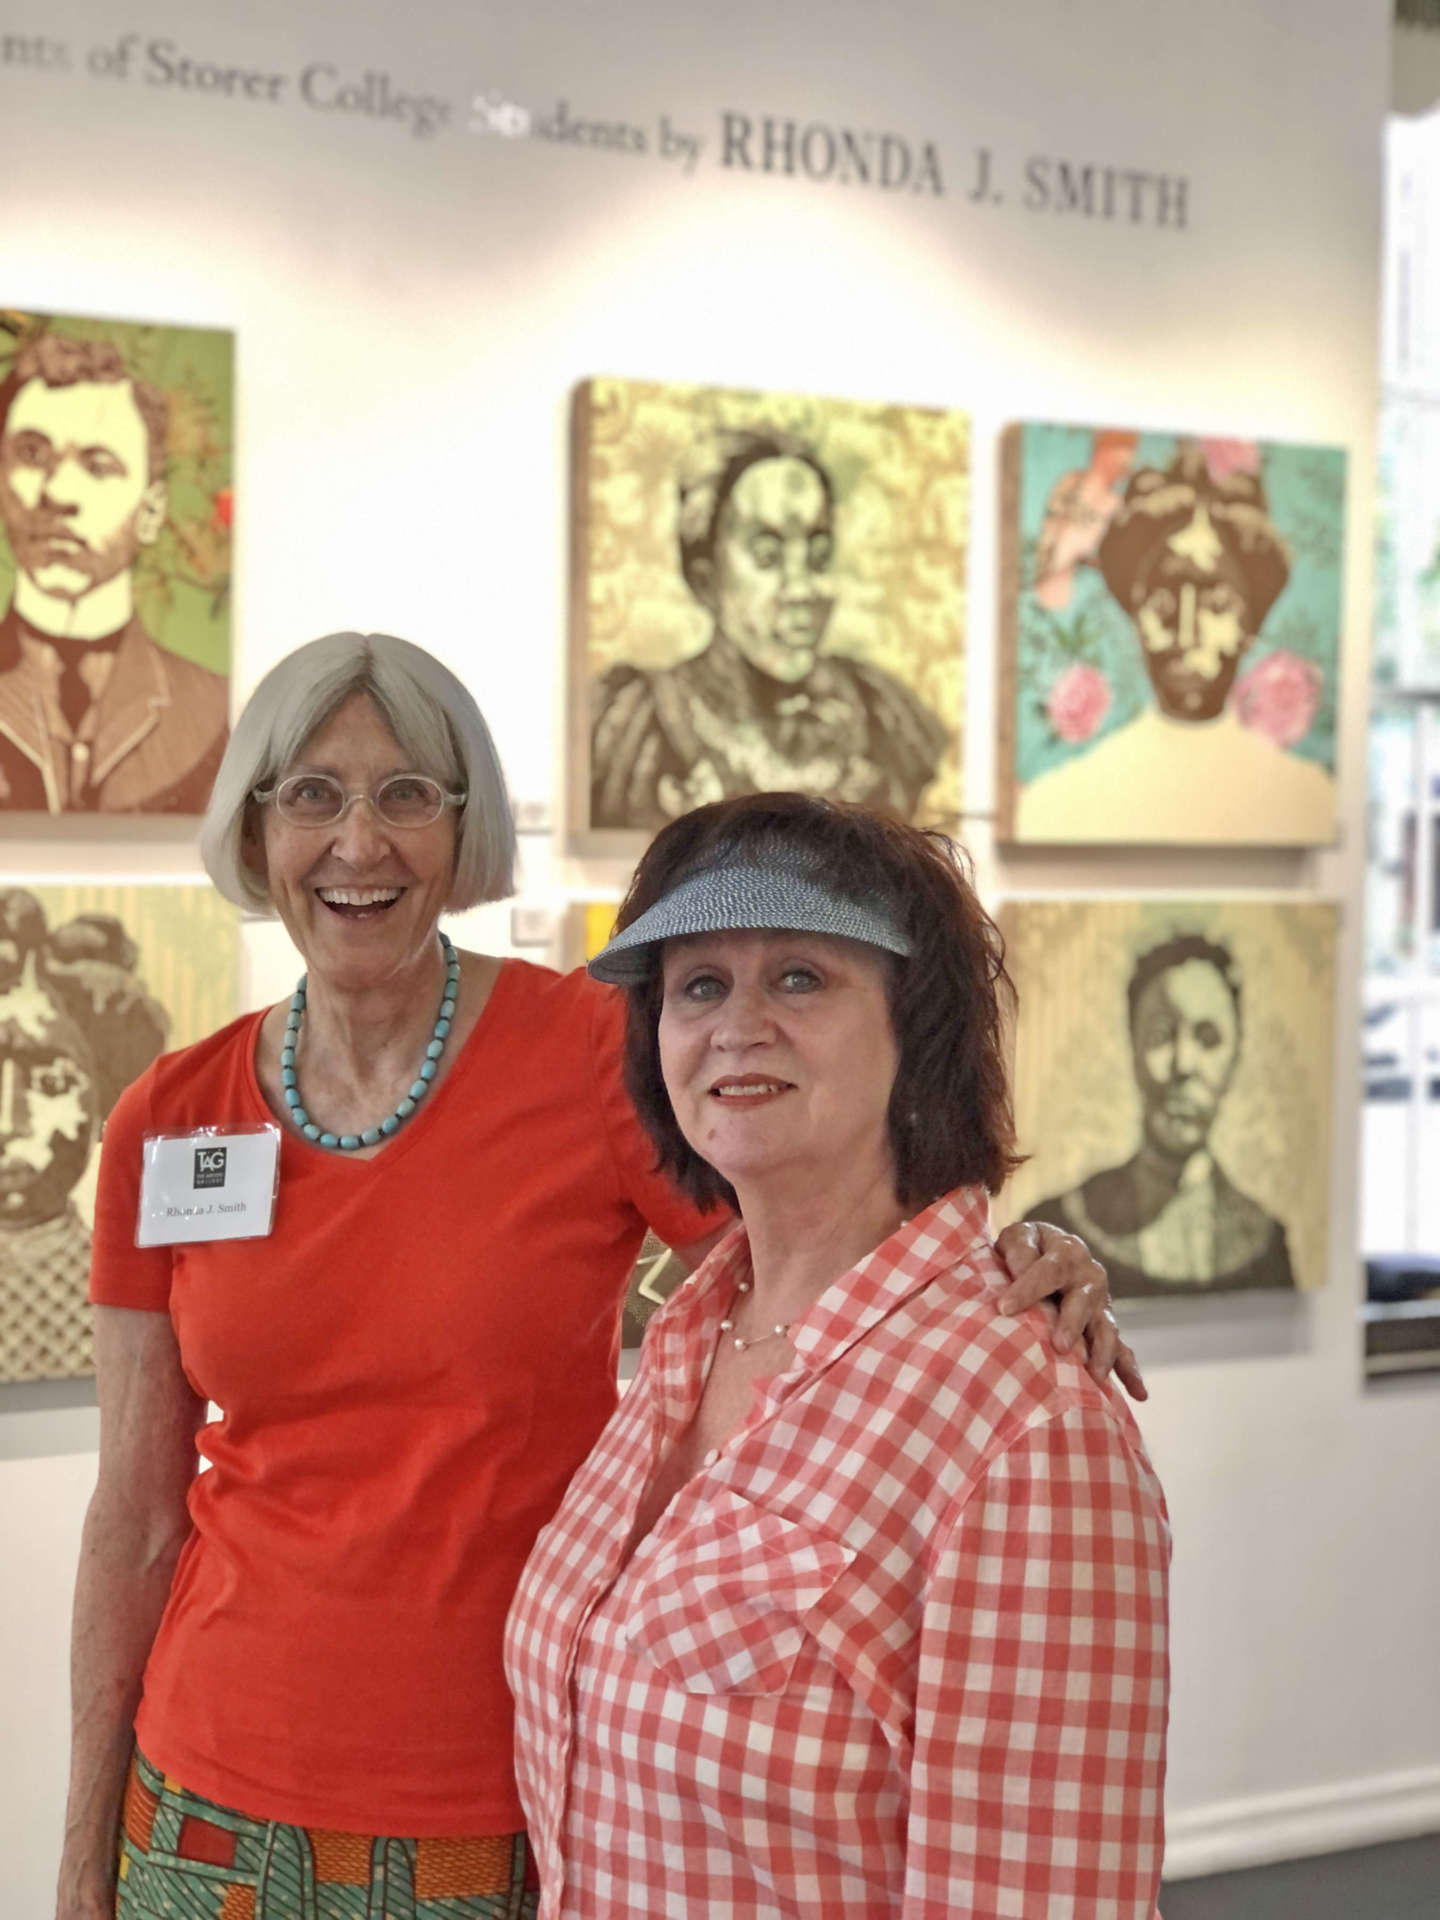 Photo of Rhonda Smith and Dawne Burke standing in front of art exhibit.